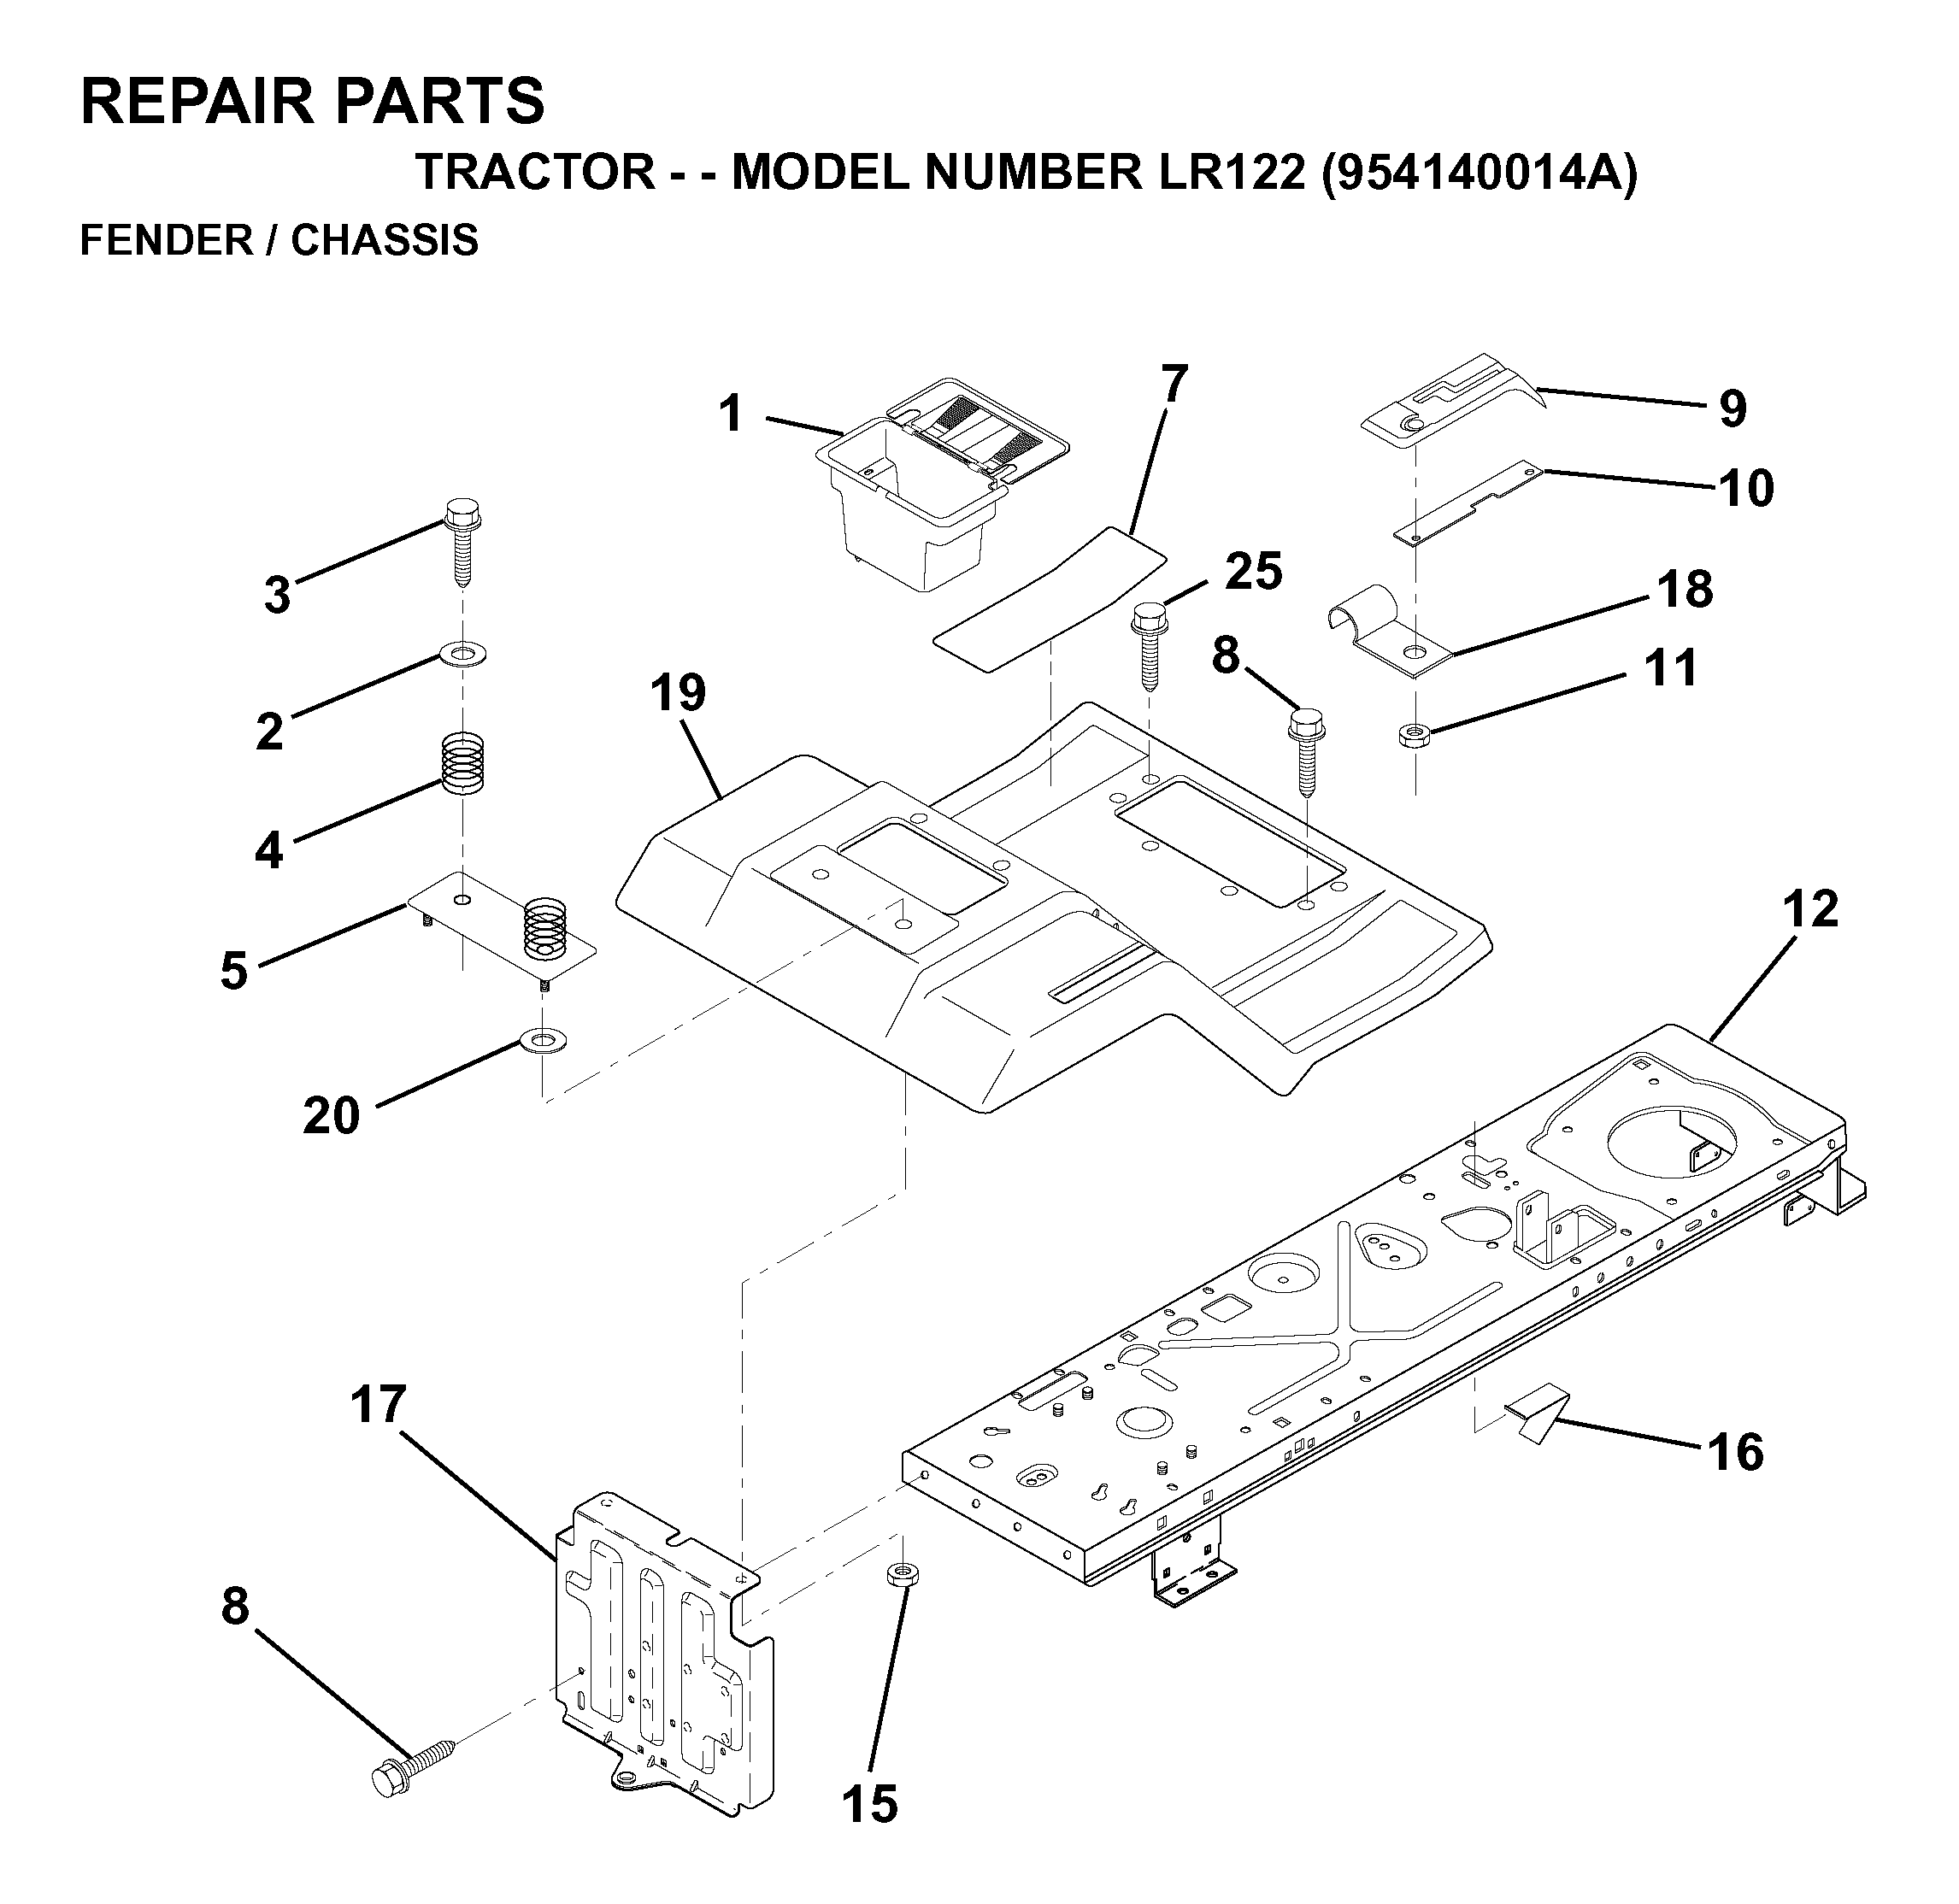 Chassis and appendix 532404349, 734117441, 817490612, 587613301, 532125142, 532134214, 596030701, 532126993, 532139783, 532124346, 532145190, 873640400, 532146613, 532140782, 532126470, 532141393, 596135301, 817190516